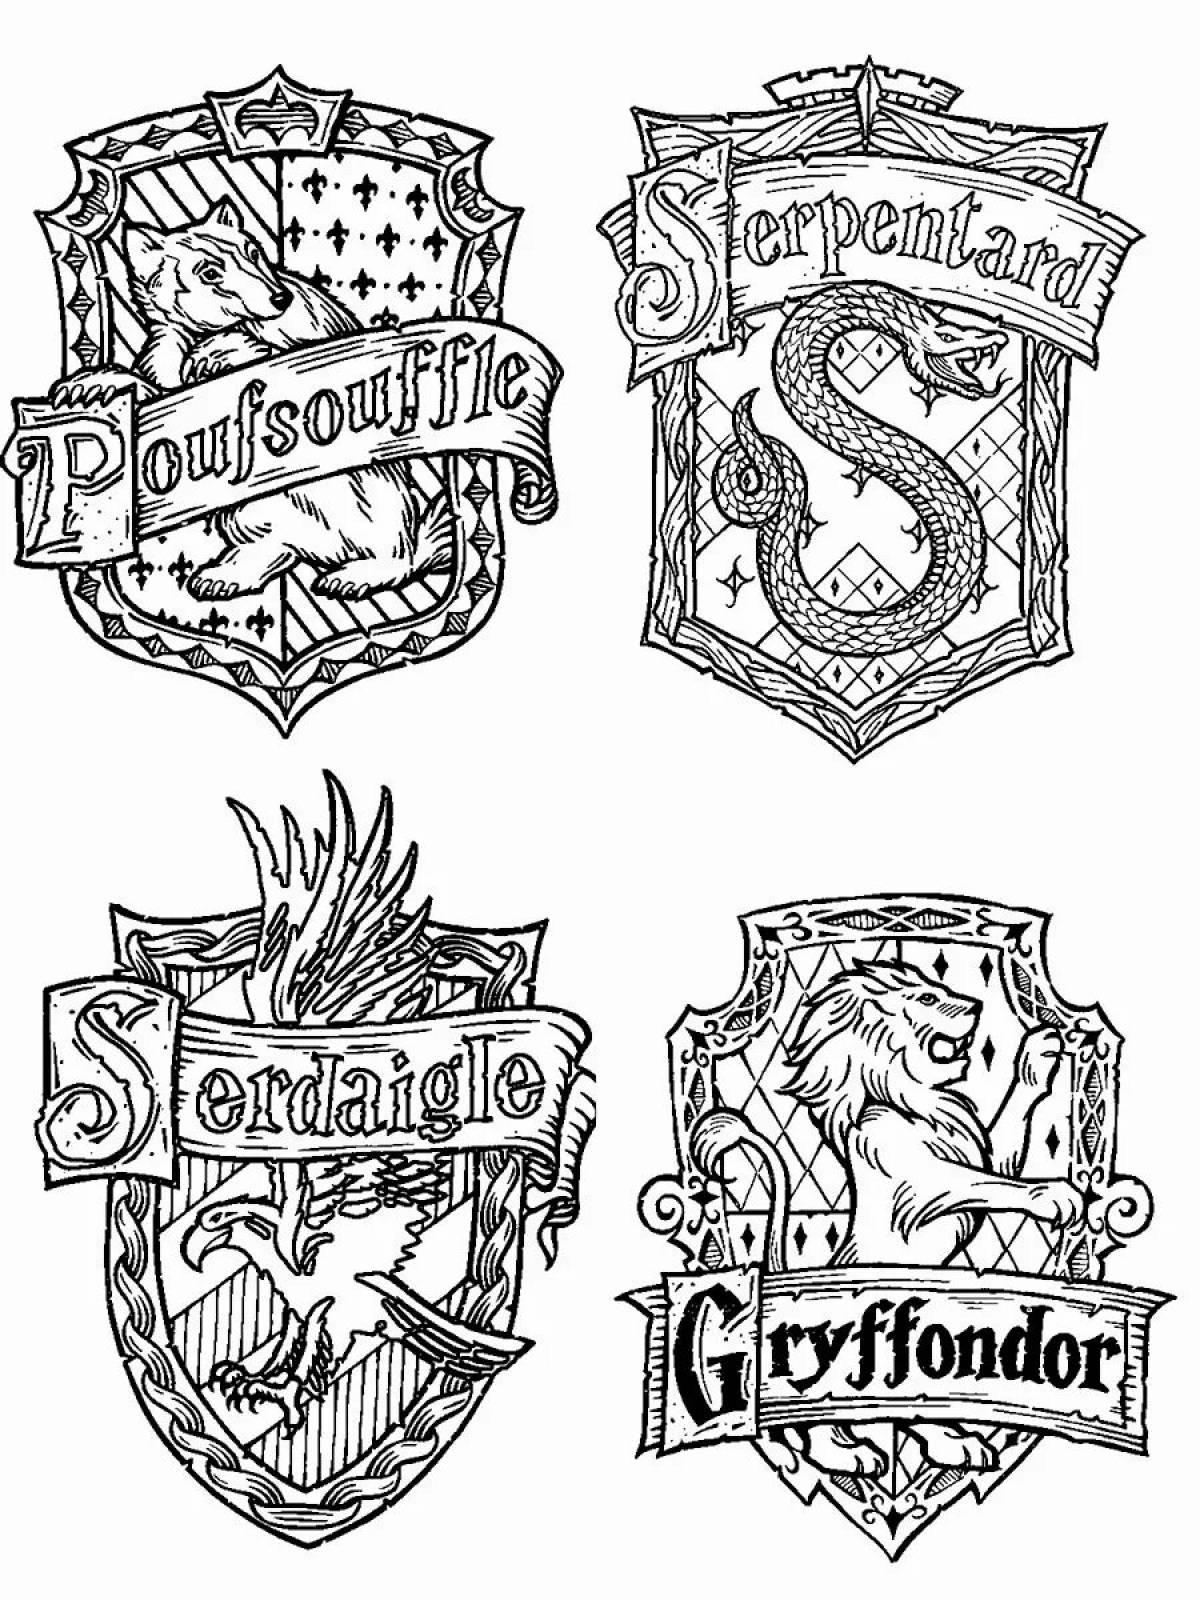 Harry Potter School of Witchcraft and Wizardry #1